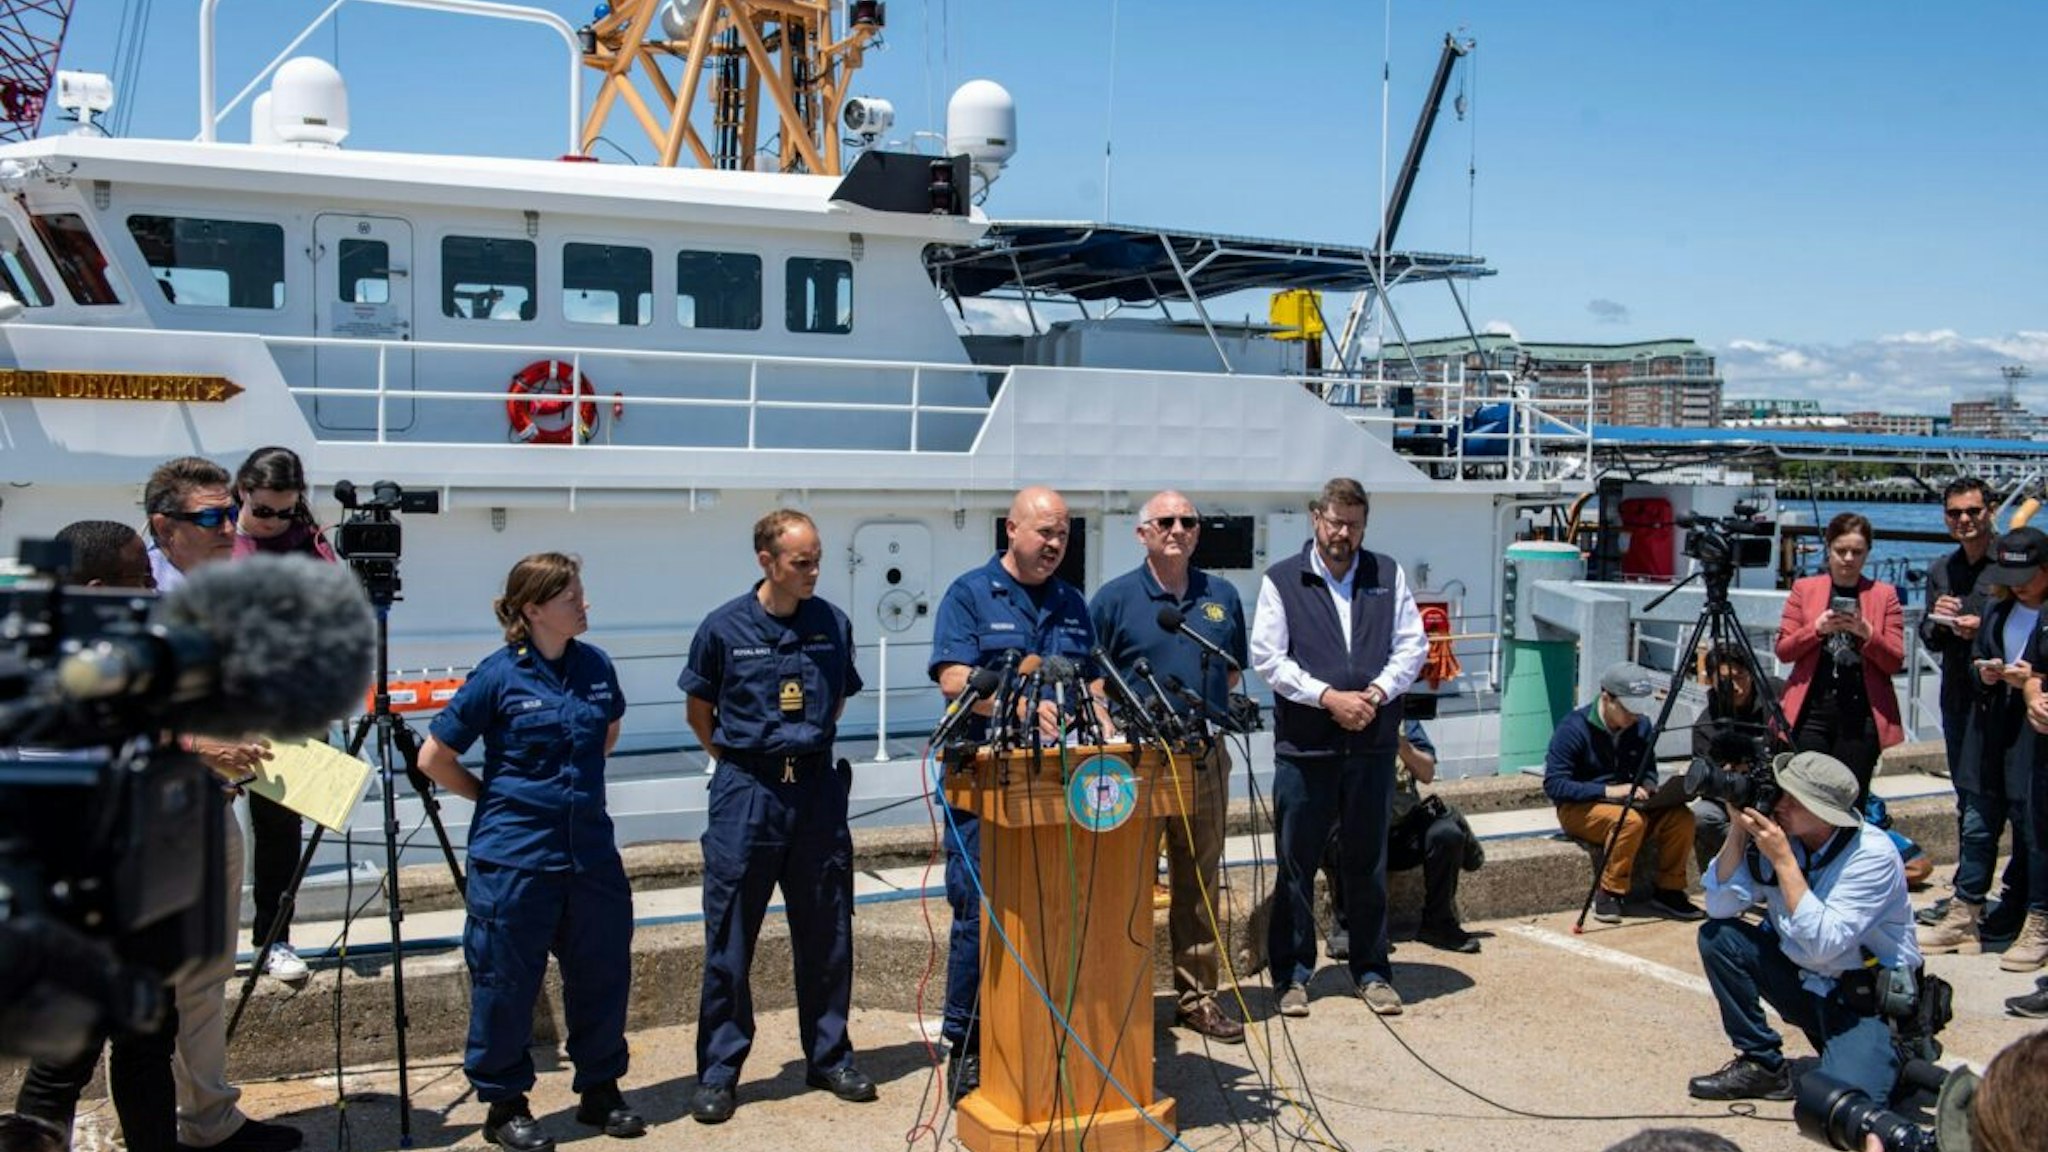 US Coast Guard (USCG) Captain Jamie Frederick speaks to reporters about the search efforts for the Titan submersible that went missing near the wreck of the Titanic, at Coast Guard Base in Boston, Massachusetts, on June 21, 2023. The USCG said Wednesday it had not identified the source of underwater noises detected by sonar in the search for the missing submersible. "We don't know what they are, to be frank with you," Frederick said regarding the sounds that had raised hopes the five people onboard are still alive. "We have to remain optimistic and hopeful when you're in a search and rescue case," he told reporters. (Photo by Joseph Prezioso / AFP)